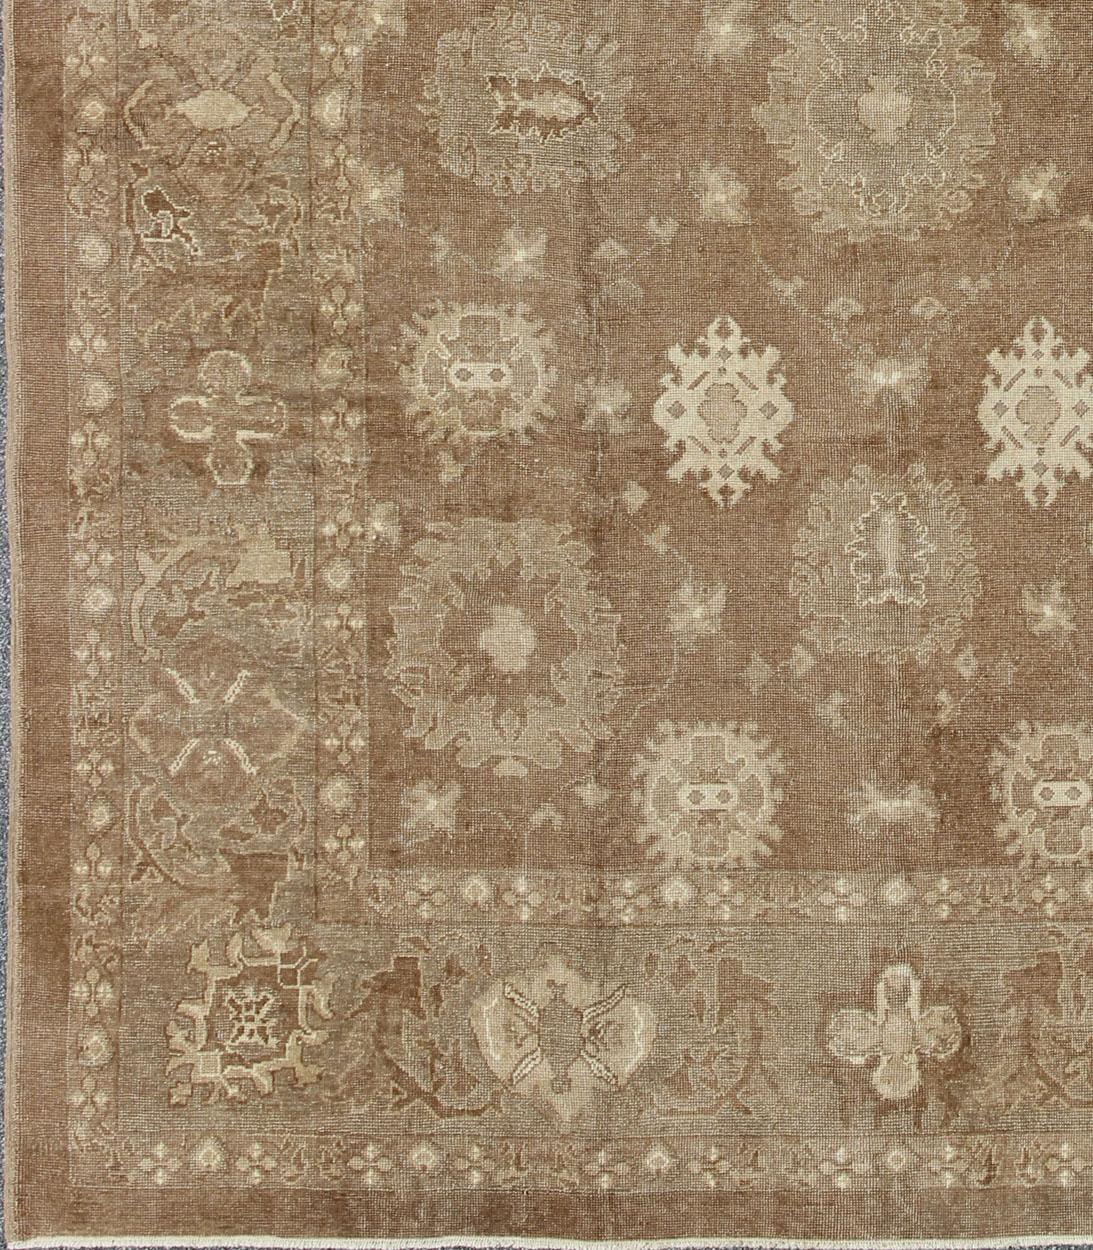 Vintage Turkish rug with neutral and earth tones and color palette in a large scale all-over design, rug en-112805, country of origin / type: Turkey / Oushak
Made originally with all natural undyed wool, this transitional Turkish rug from Turkey